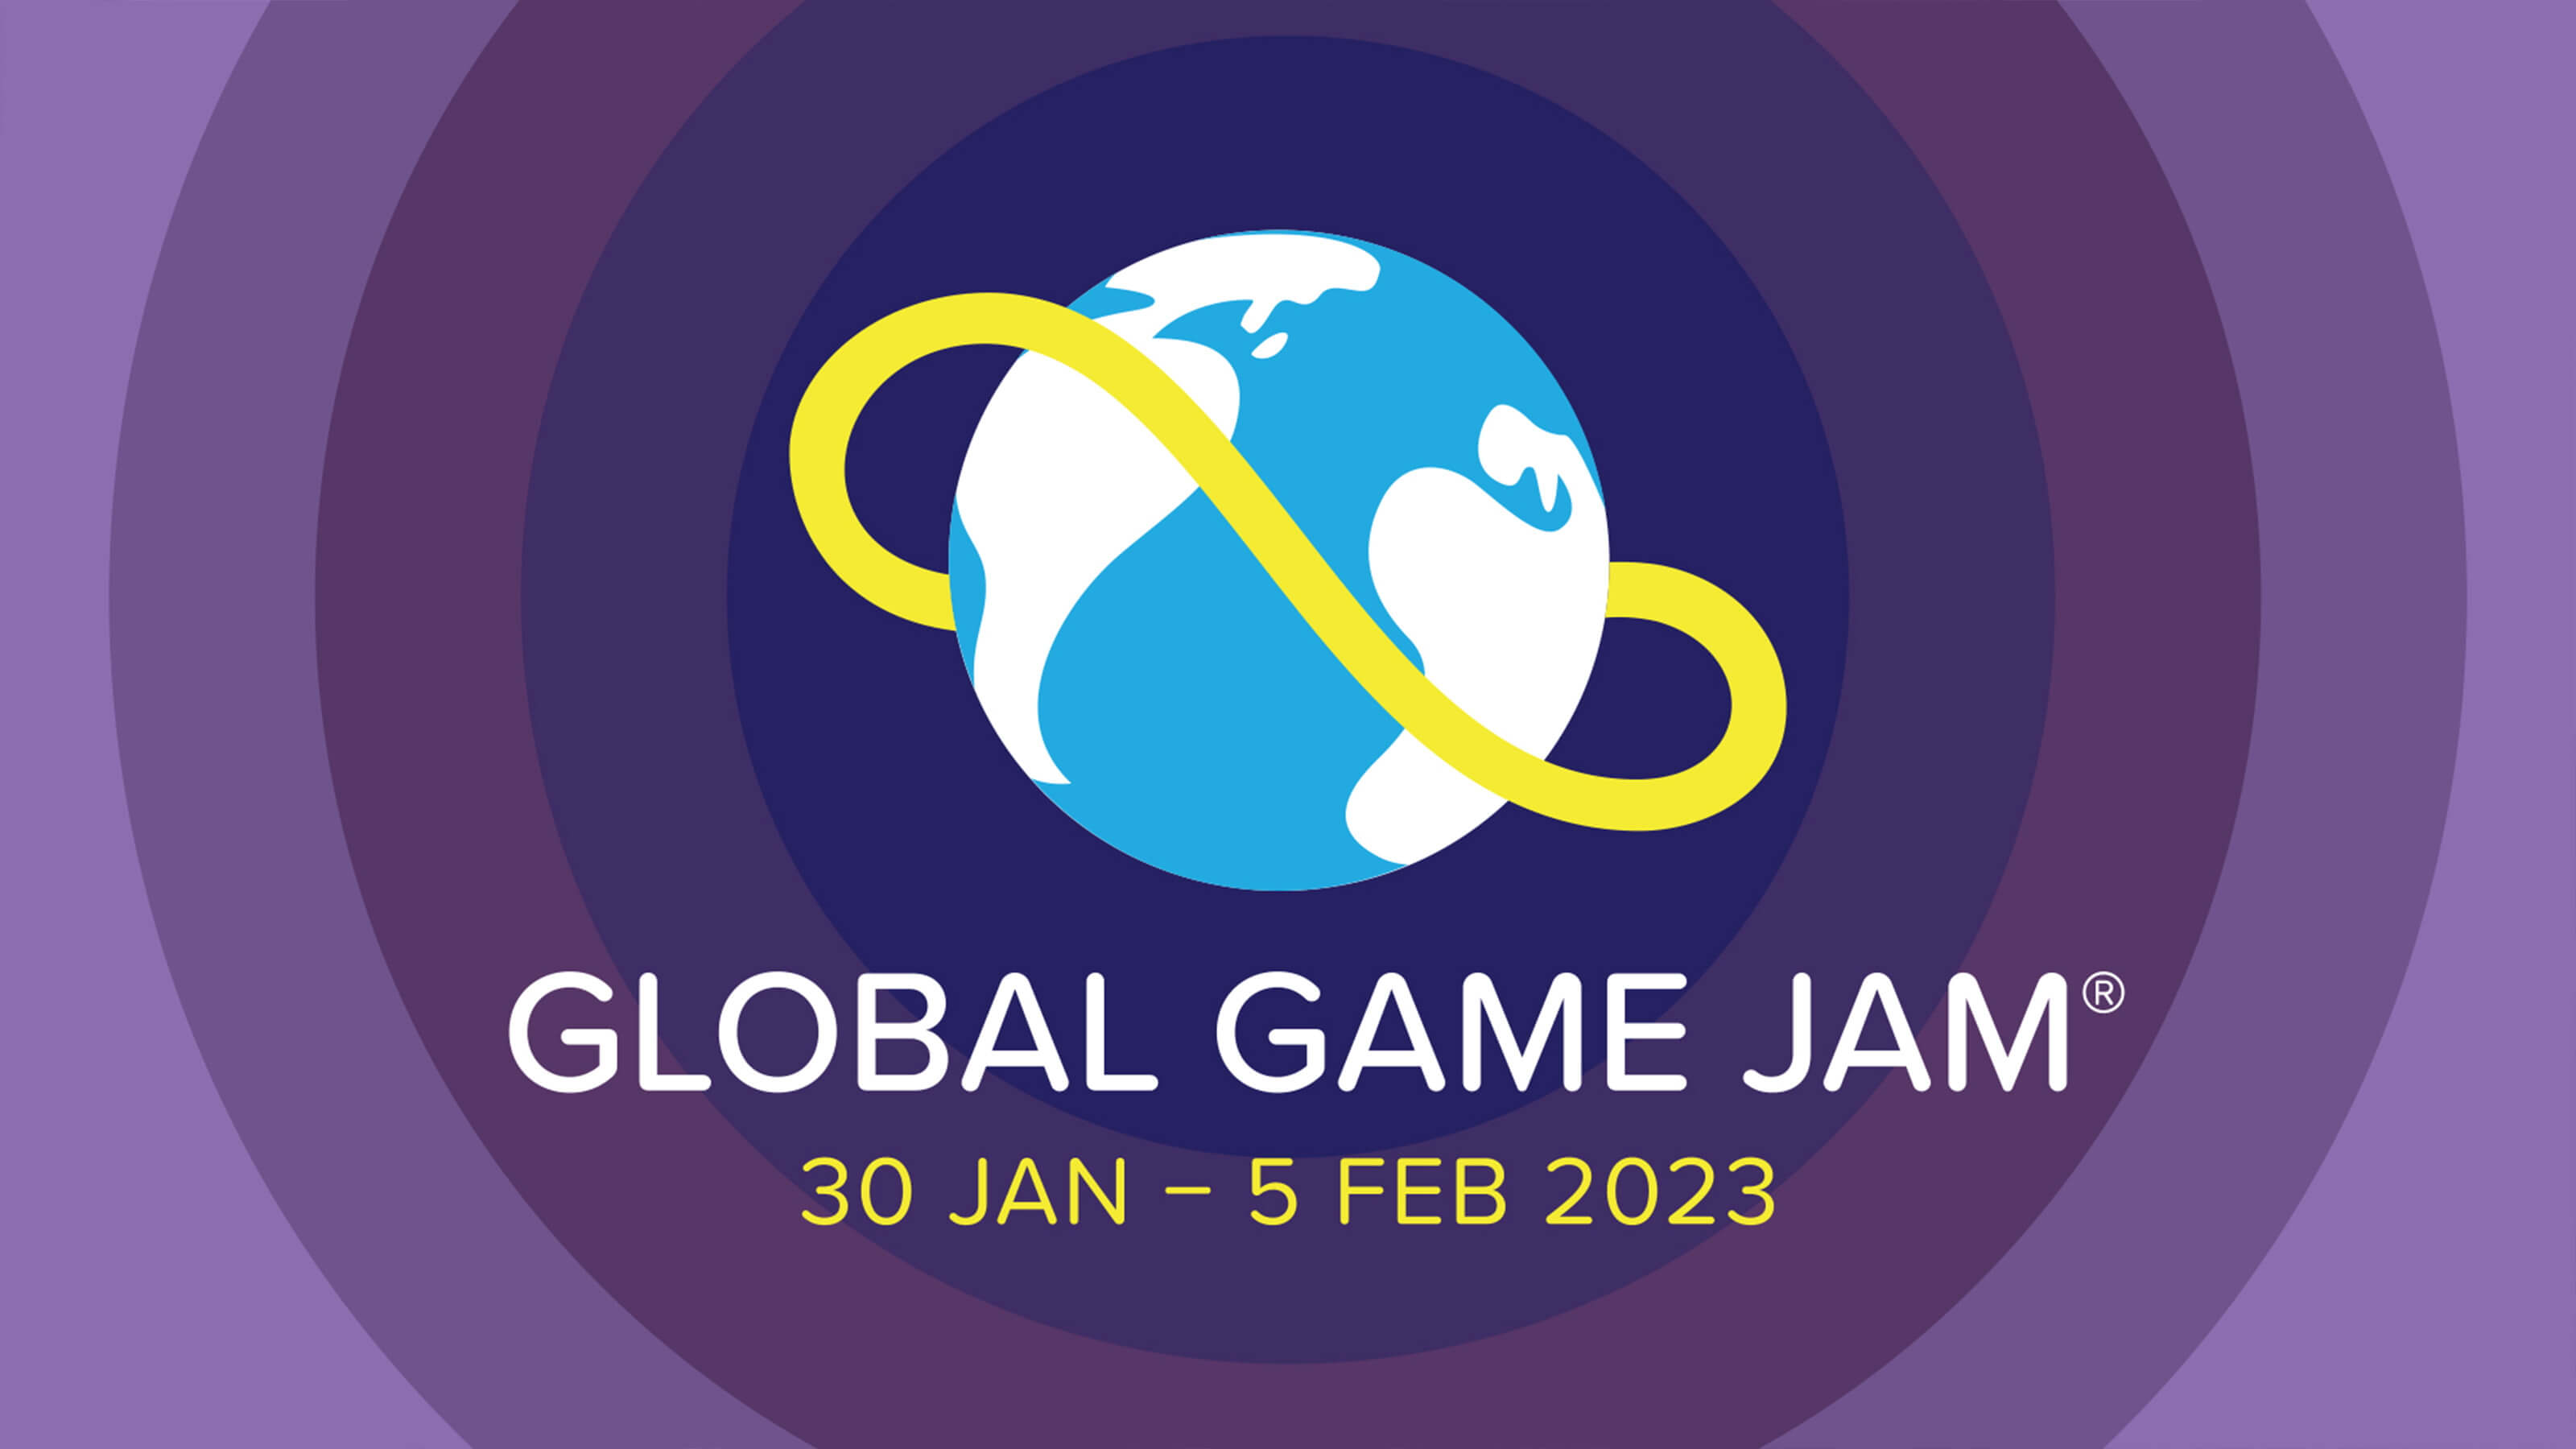 Global game jam logo with its dates listed below it.